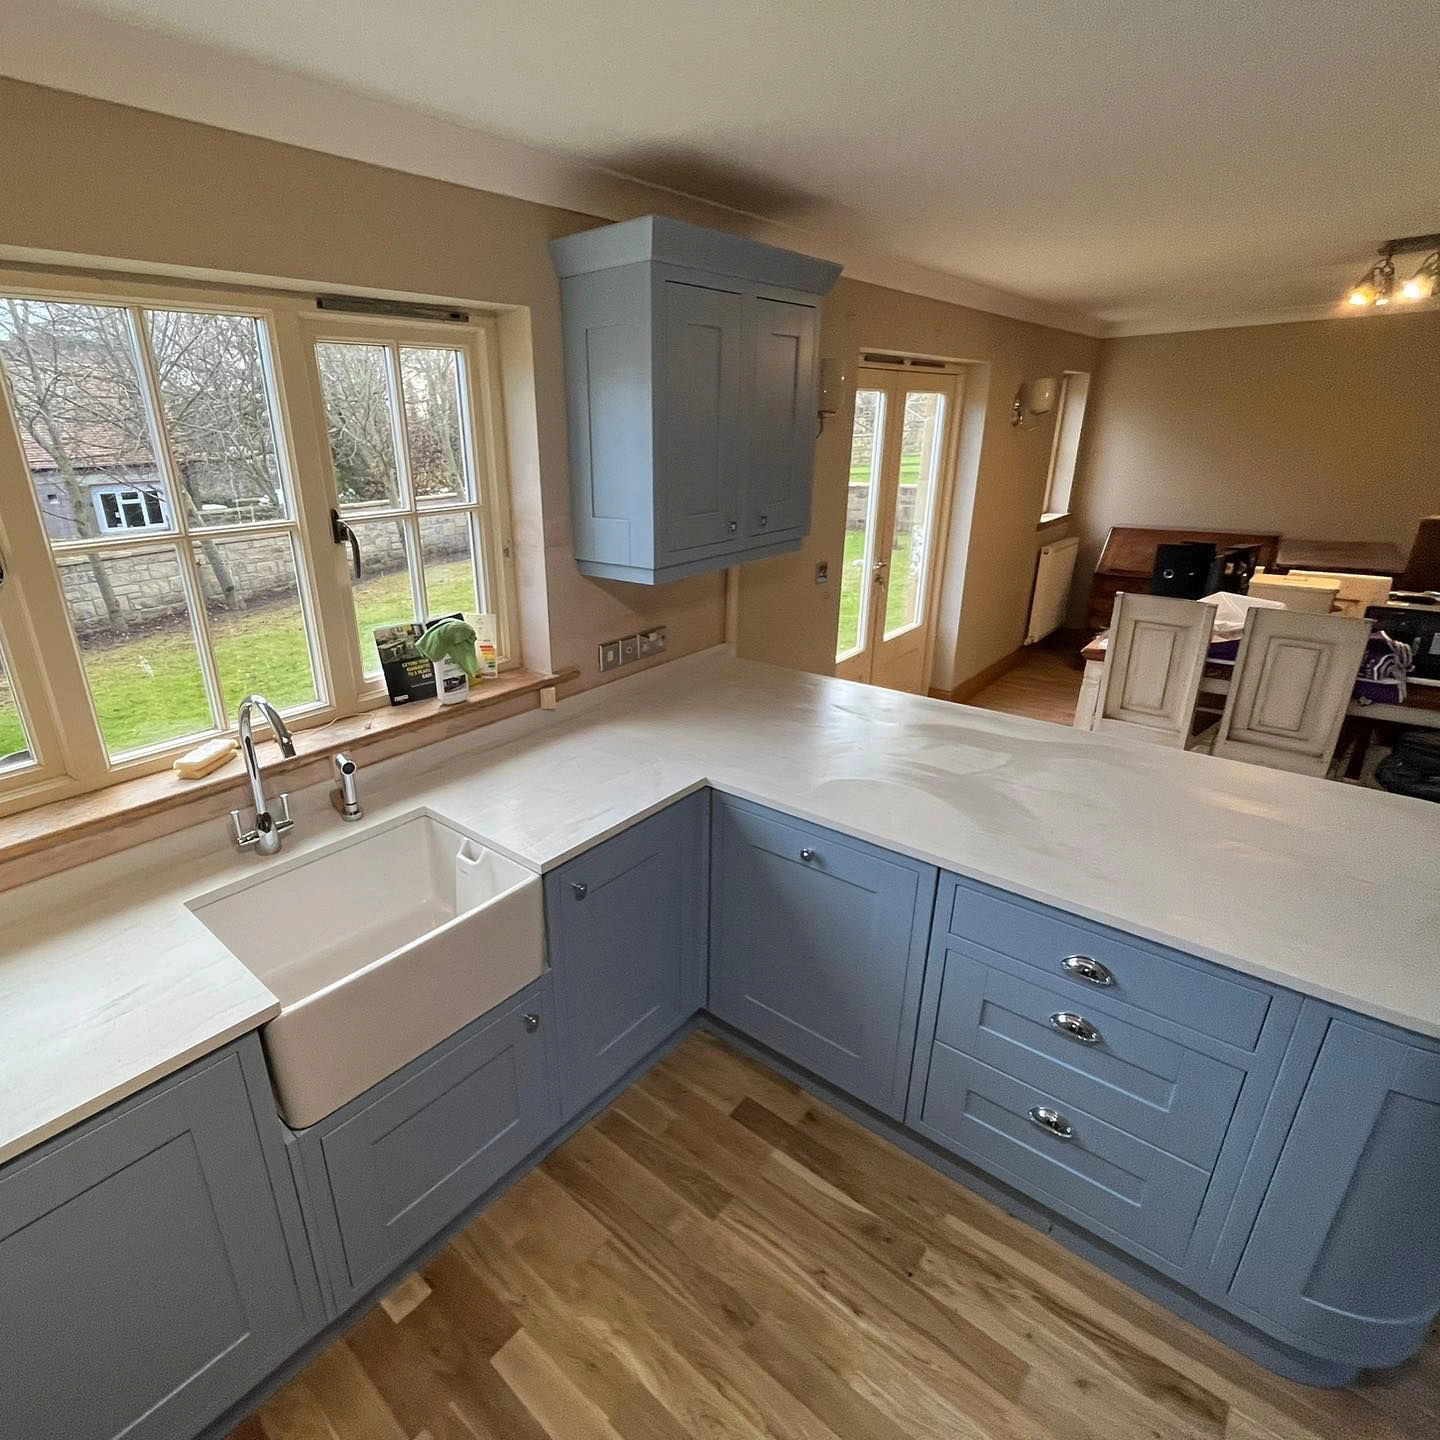 Farrow and Ball Lulworth Blue 89 kitchen cabinets